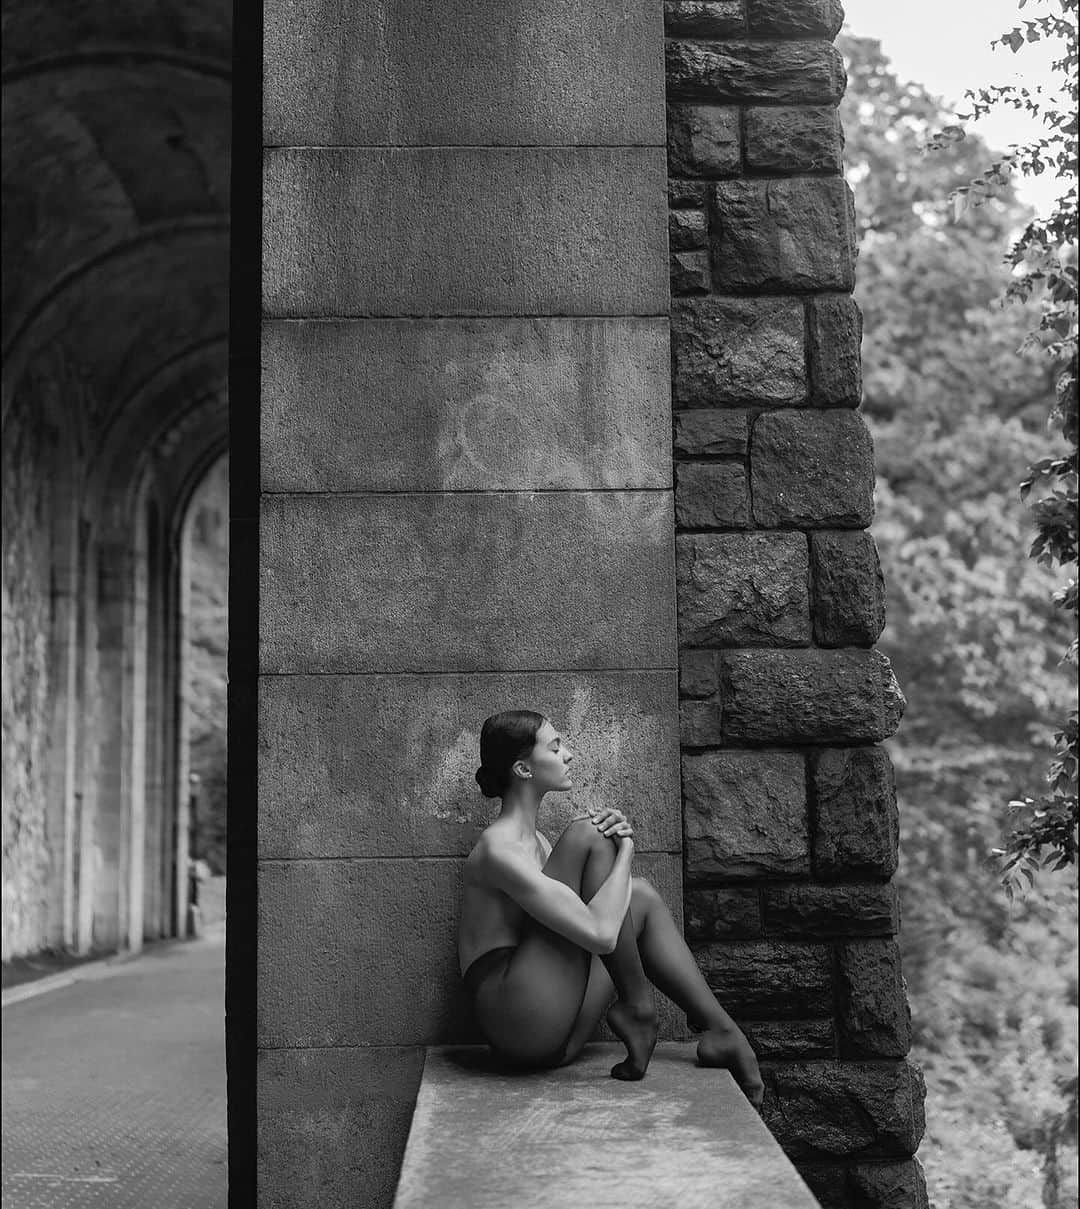 ballerina projectさんのインスタグラム写真 - (ballerina projectInstagram)「𝐒𝐲𝐝𝐧𝐞𝐲 𝐃𝐨𝐥𝐚𝐧 at Fort Tryon Park in New York City.   @sydney.dolan #sydneydolan #ballerinaproject #forttryonpark #newyorkcity #ballerina #ballet @wolford #wolford #hosiery #tights   Ballerina Project 𝗹𝗮𝗿𝗴𝗲 𝗳𝗼𝗿𝗺𝗮𝘁 𝗹𝗶𝗺𝗶𝘁𝗲𝗱 𝗲𝗱𝘁𝗶𝗼𝗻 𝗽𝗿𝗶𝗻𝘁𝘀 and 𝗜𝗻𝘀𝘁𝗮𝘅 𝗰𝗼𝗹𝗹𝗲𝗰𝘁𝗶𝗼𝗻𝘀 on sale in our Etsy store. Link is located in our bio.  𝙎𝙪𝙗𝙨𝙘𝙧𝙞𝙗𝙚 to the 𝐁𝐚𝐥𝐥𝐞𝐫𝐢𝐧𝐚 𝐏𝐫𝐨𝐣𝐞𝐜𝐭 on Instagram to have access to exclusive and never seen before content. 🩰」11月21日 21時35分 - ballerinaproject_